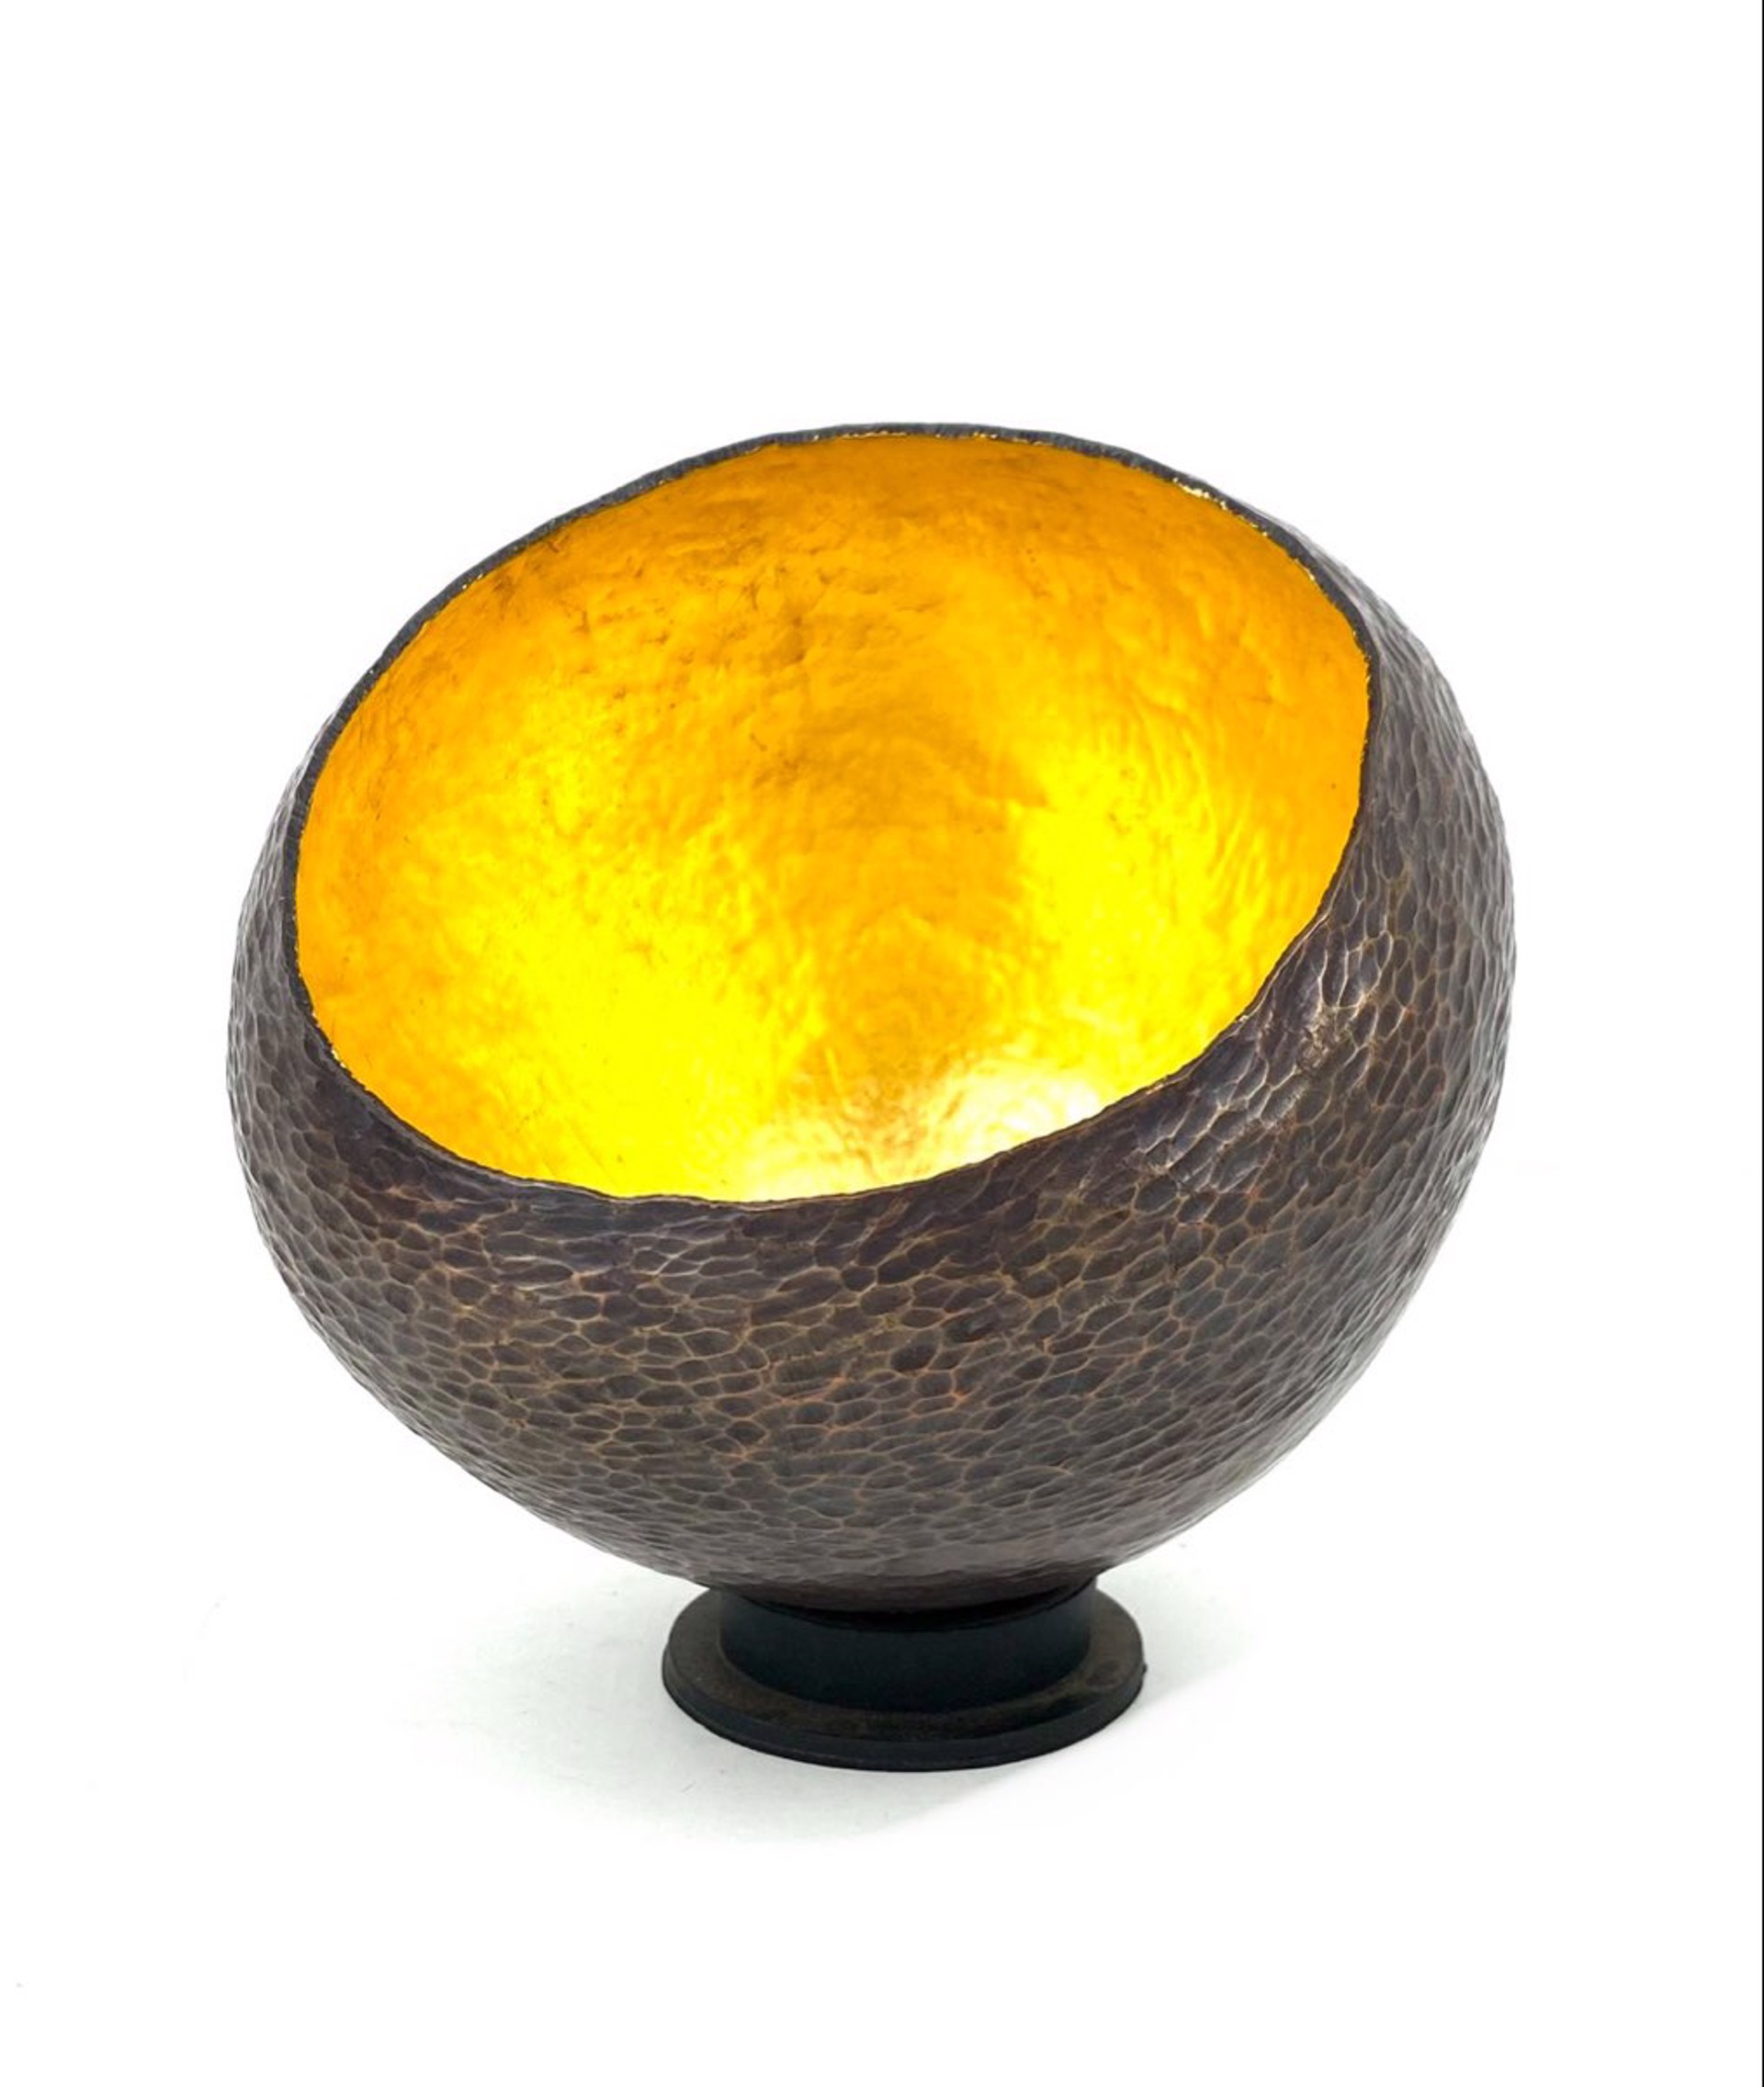 Hammered Texture Vessel by Robert Taylor